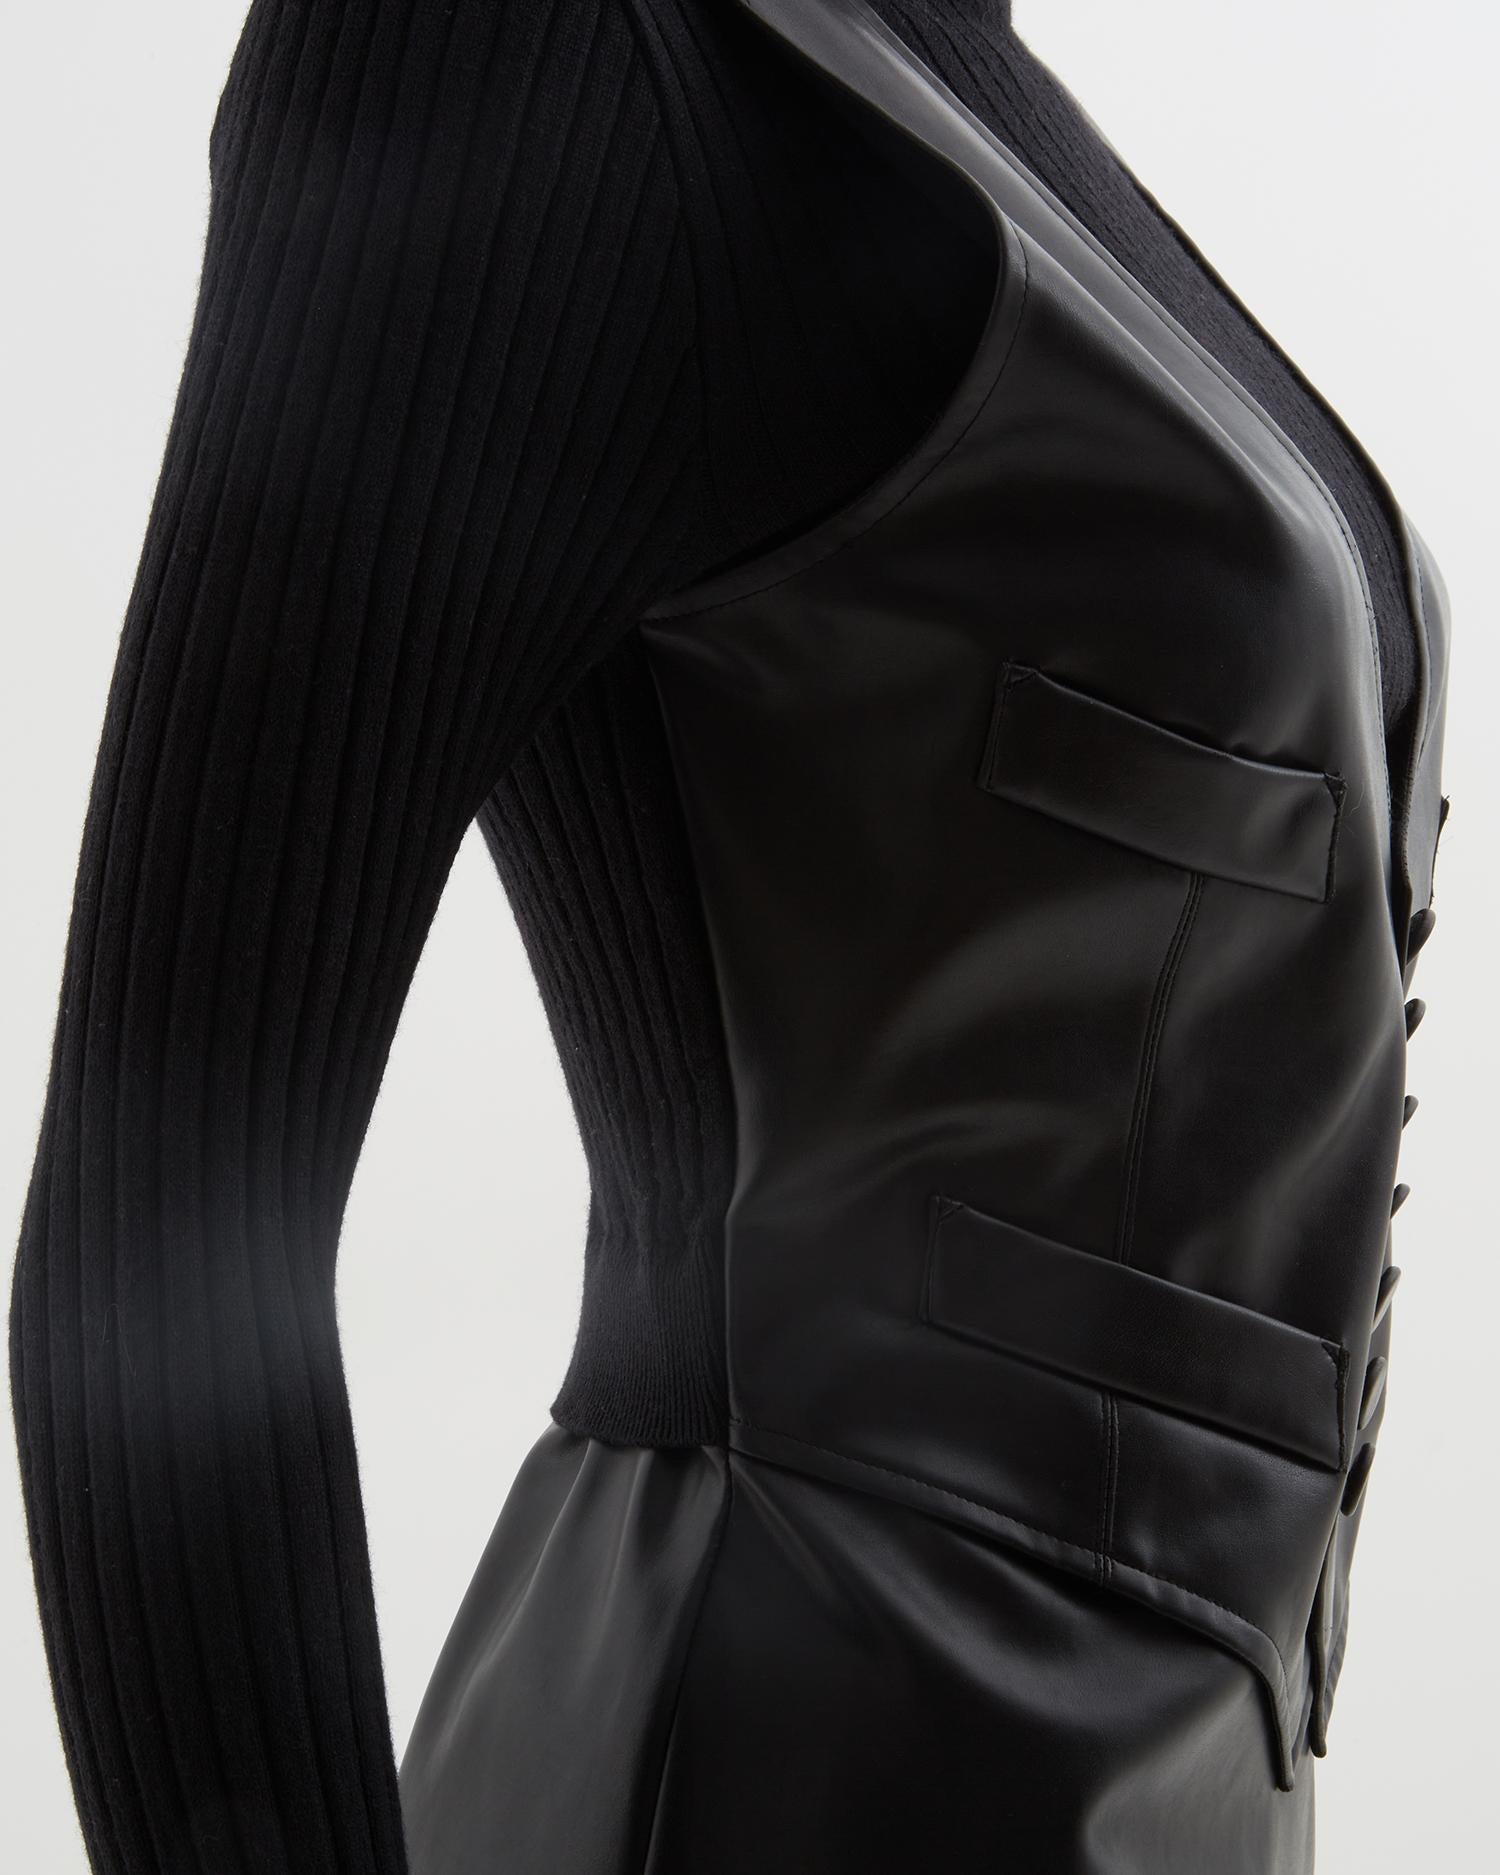 Jean Paul Gaultier black vegan leather & ribbed knit high-neck wool dress, ealry For Sale 3